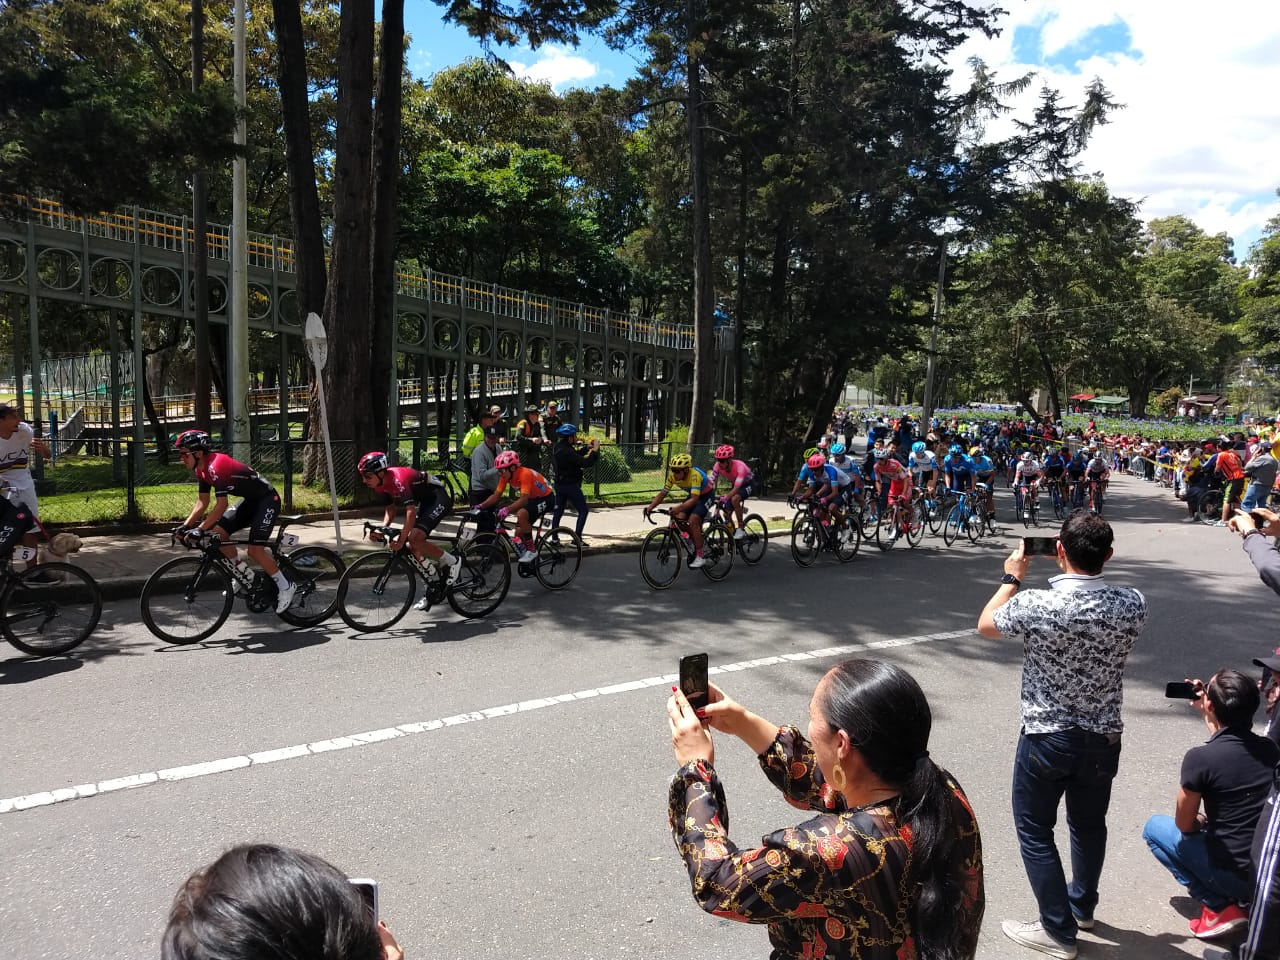 Education First 1-2 confirms victory for Higuita in the Tour Colombia